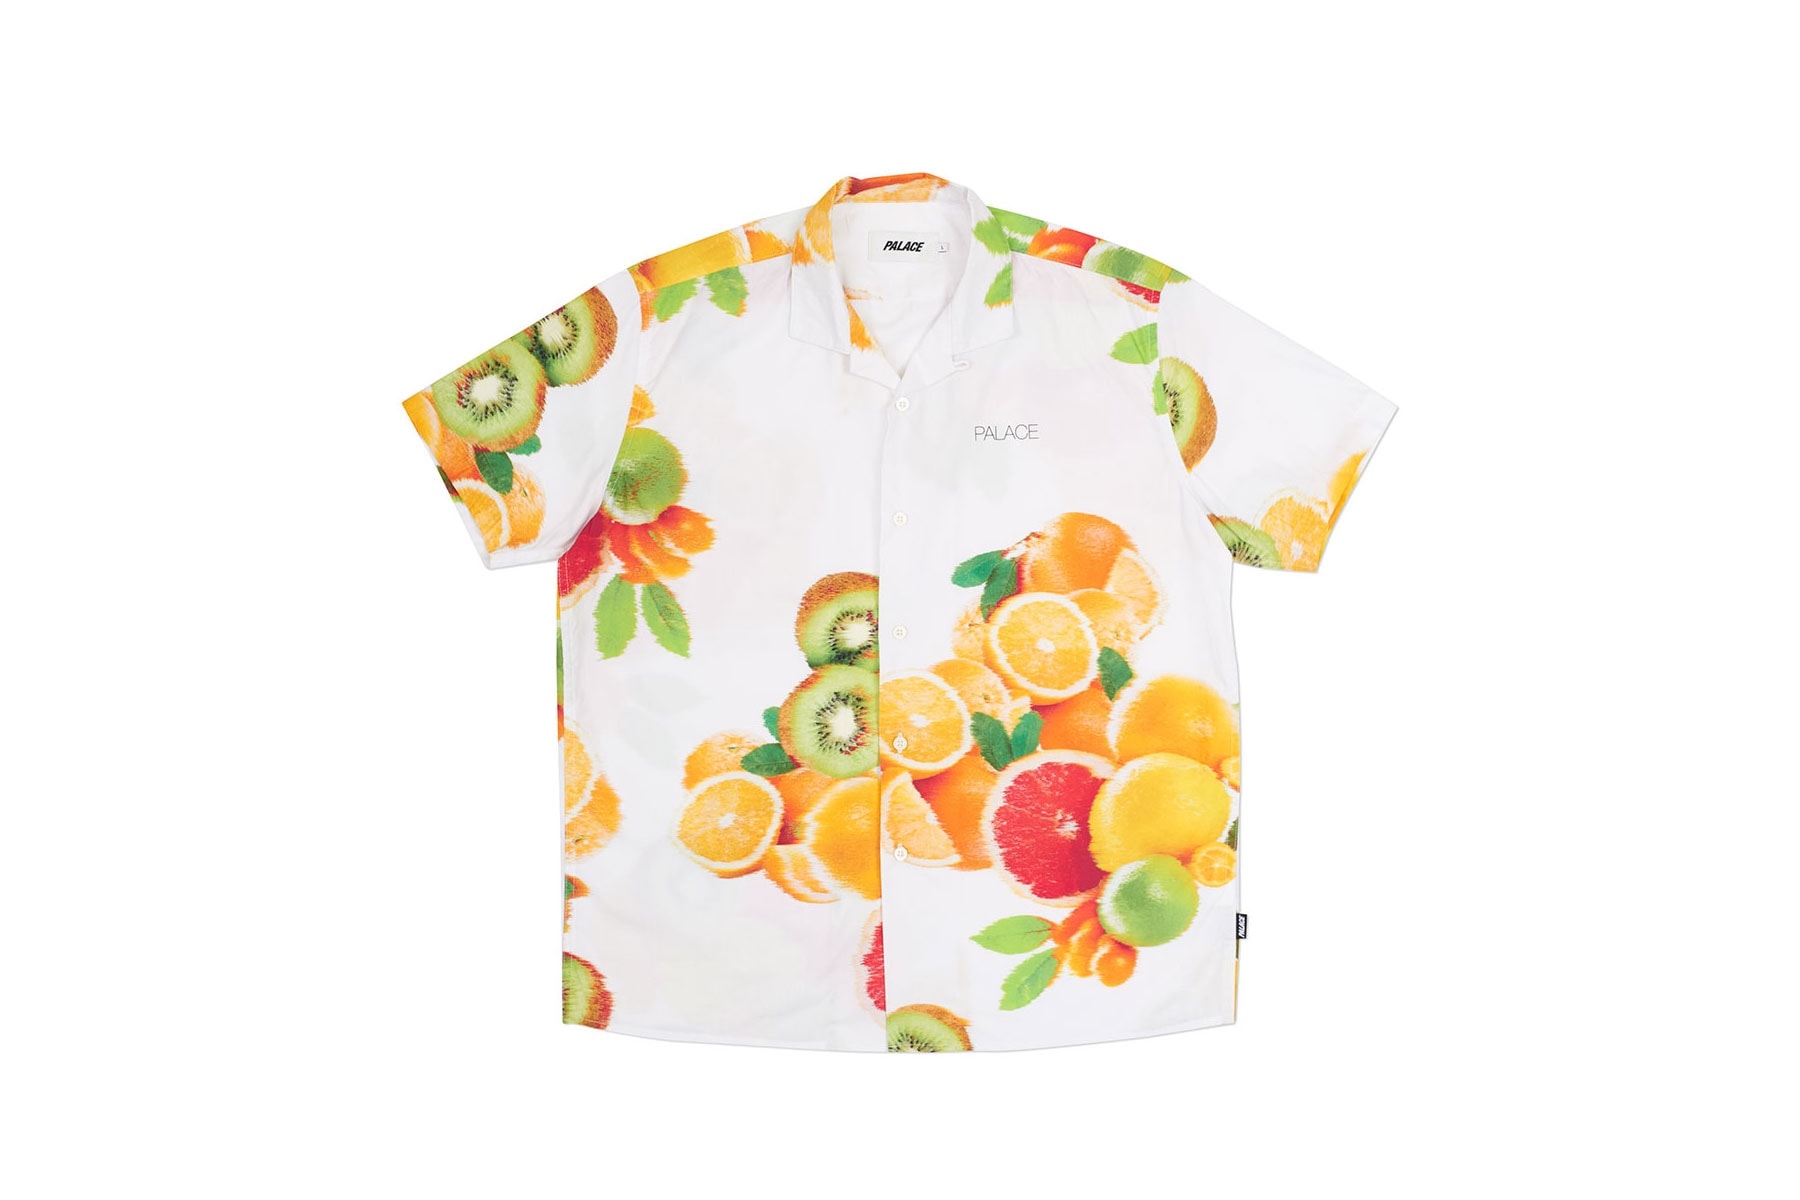 Palace 2017 Summer Collection